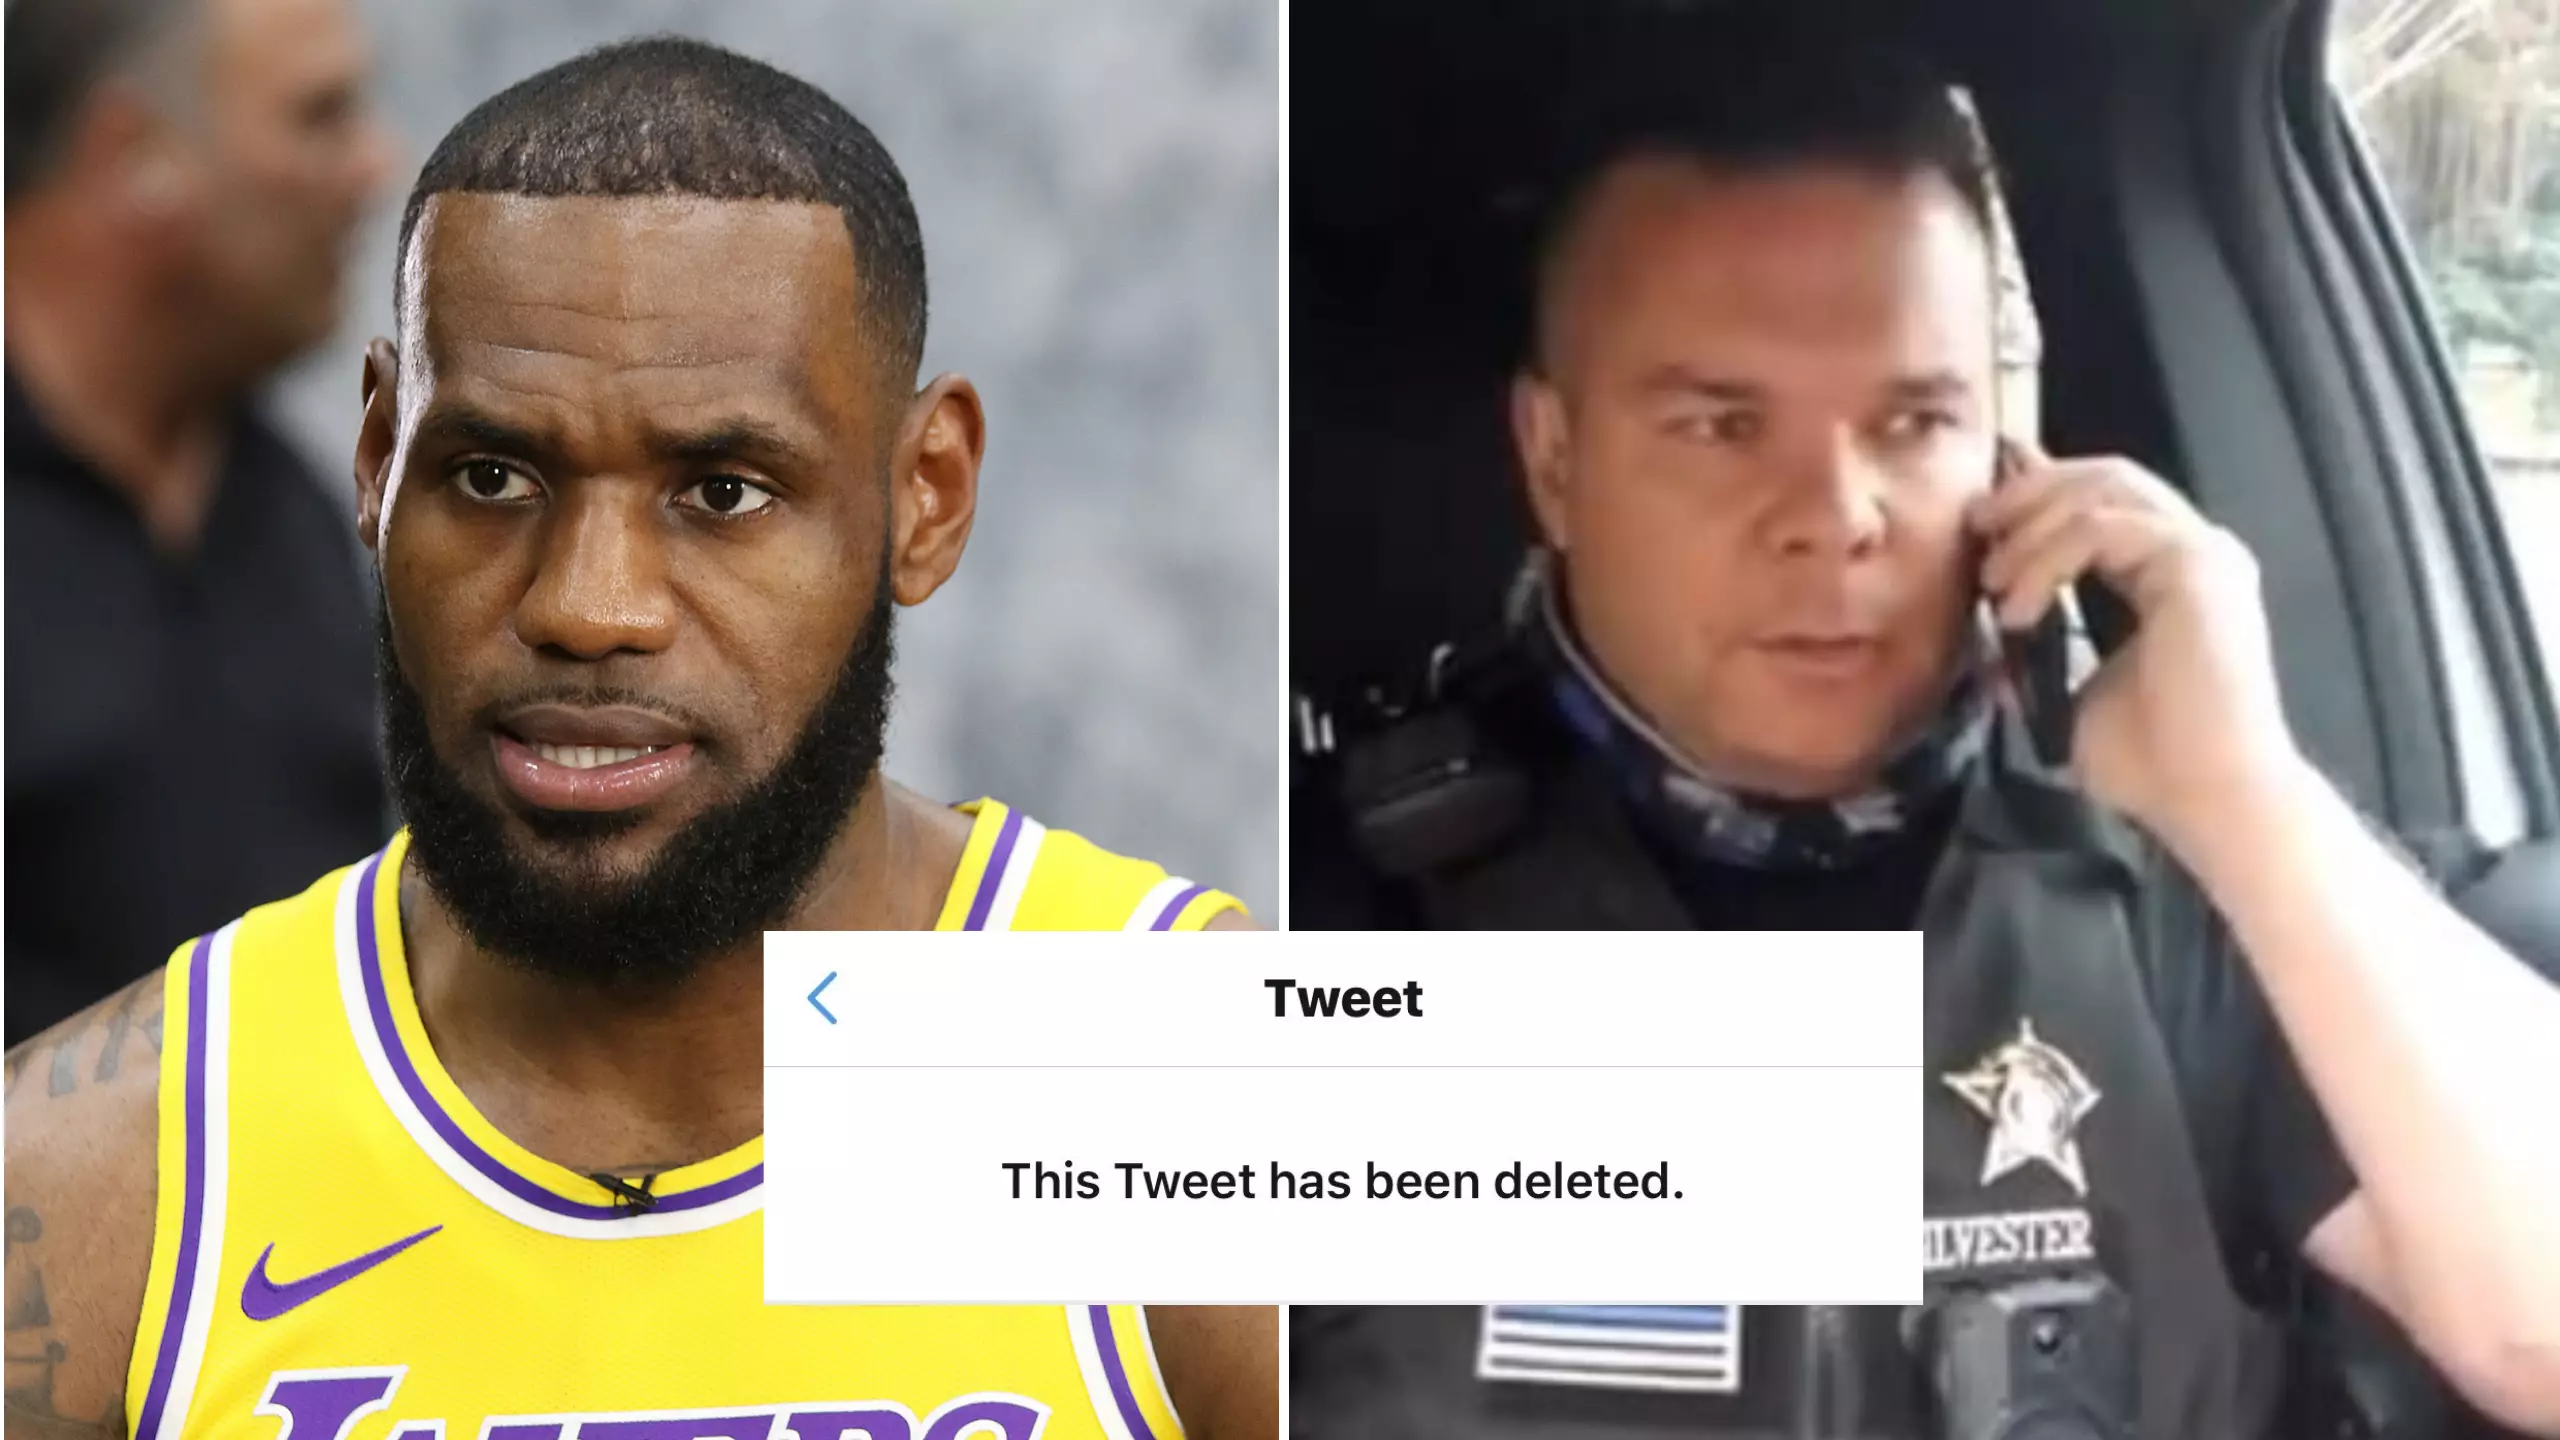 LeBron James' Controversial Deleted Tweet About Police Officer Mocked By Cop In TikTok